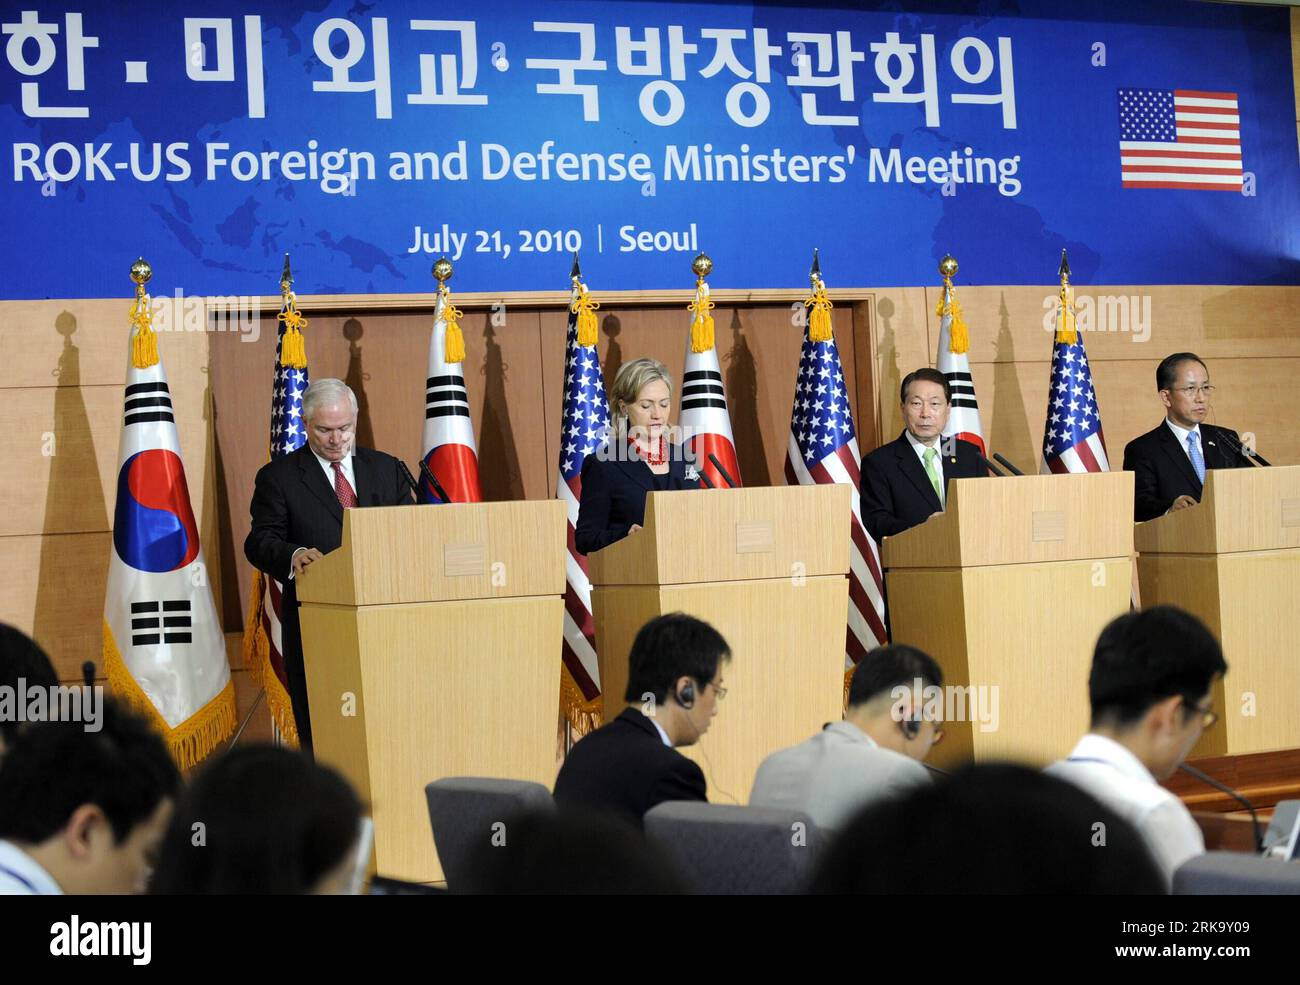 Bildnummer: 54244462  Datum: 21.07.2010  Copyright: imago/Xinhua (100721) -- SEOUL, July 21, 2010 (Xinhua) -- South Korean Foreign Minister Yu Myung-hwan (2nd R), Defense Minister Kim Tae-young (1st R) and U.S. Secretary of State Hillary Clinton (2nd L), U.S. Defense Secretary Robert Gates hold a joint press conference after their meeting in Seoul, July 21, 2010. Top diplomats and defense officials from South Korea and the United States on Wednesday warned of serious consequences in case of the Democratic People s Republic of Korea (DPRK) s further provocations and announced a plan to introduc Stock Photo